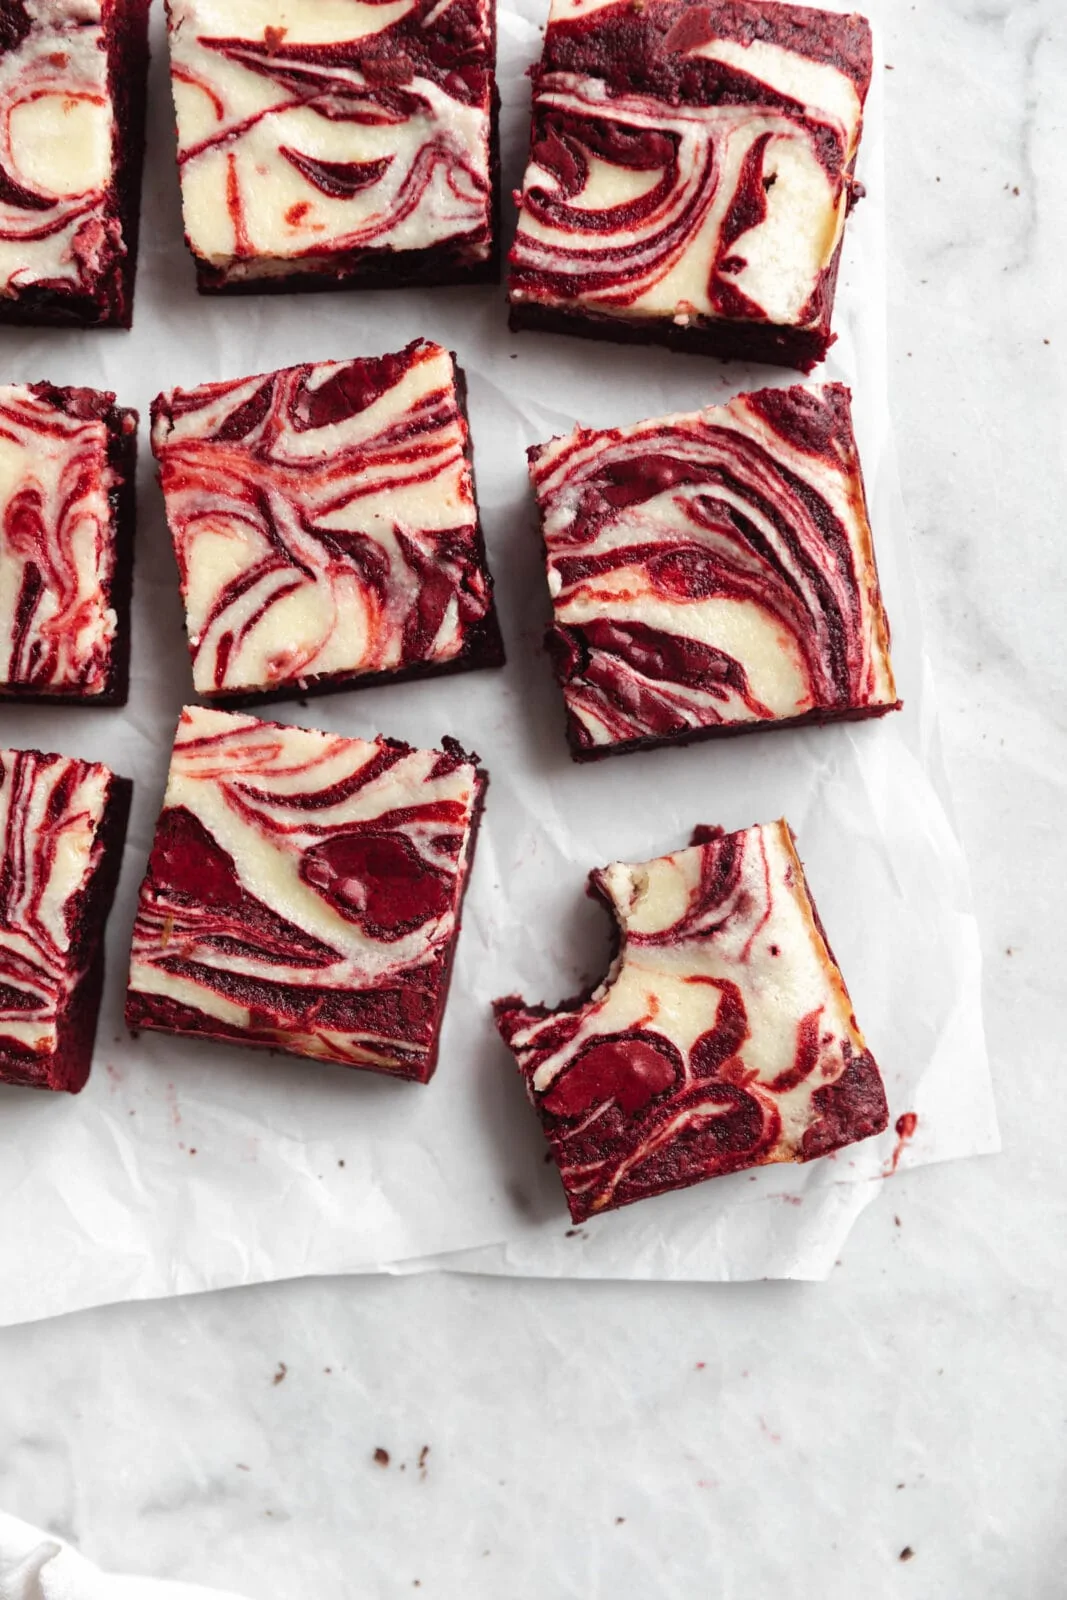 Red Velvet Cheesecake Brownies from bromabakery.com on foodiecrush.com